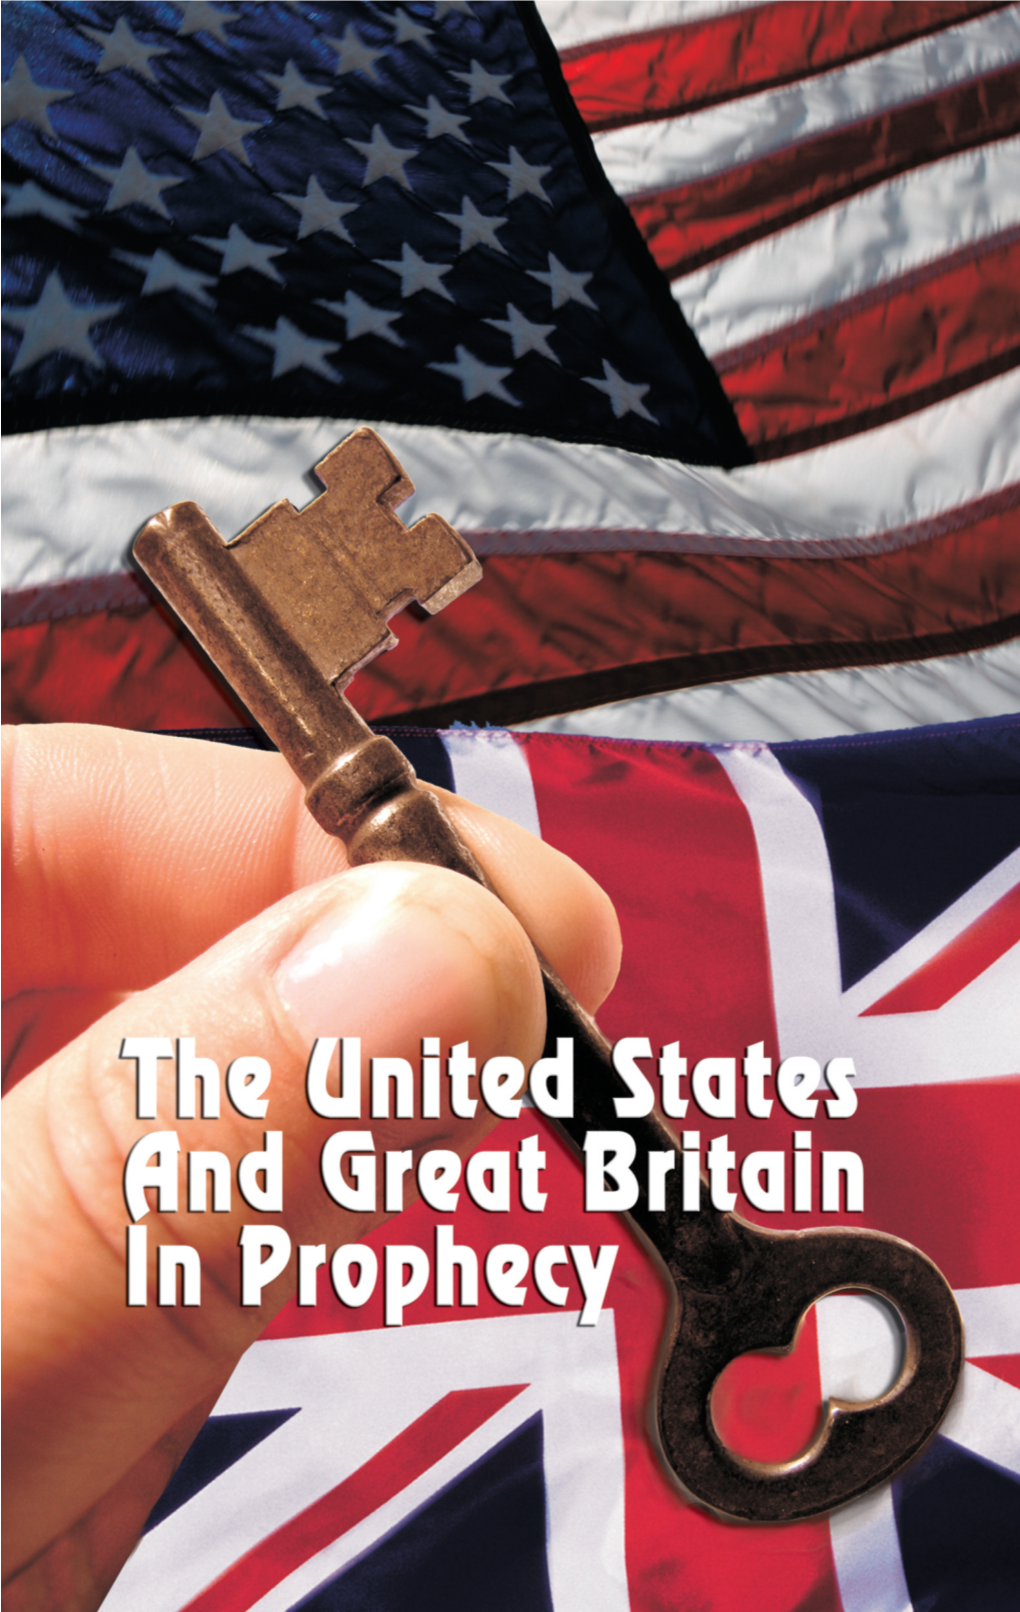 The United States and Great Britain in Prophecy by John H